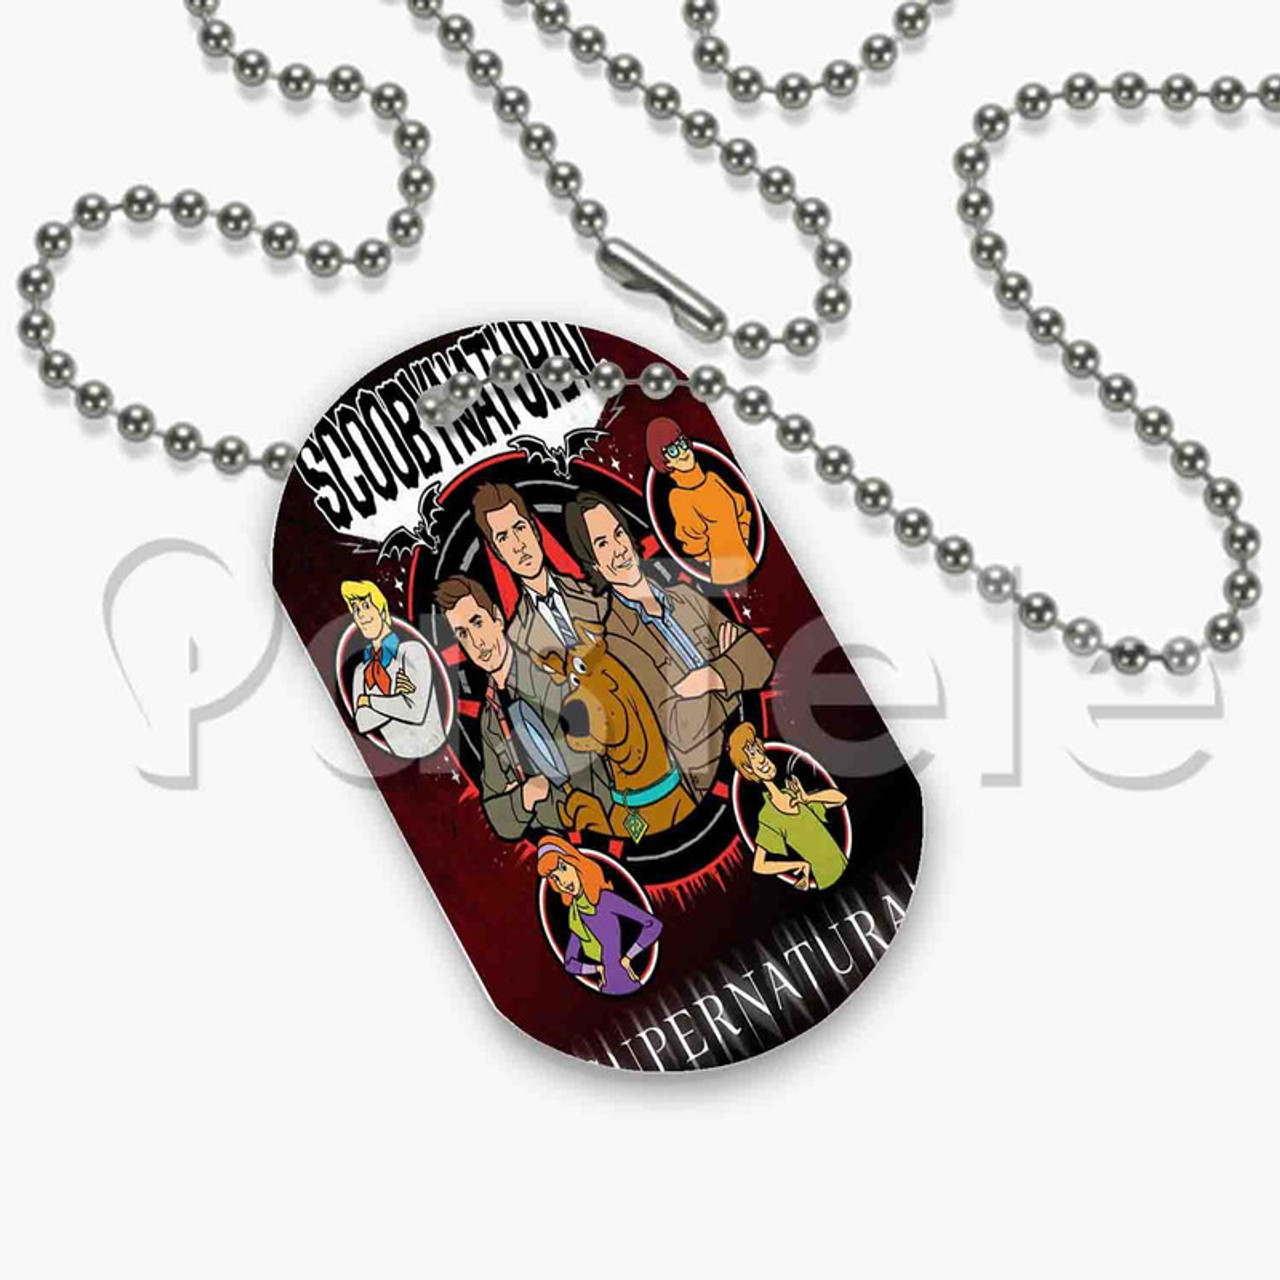 Supernatural Scooby Doo Custom Personalized Dog Tags ID Name Tag Pet Tag